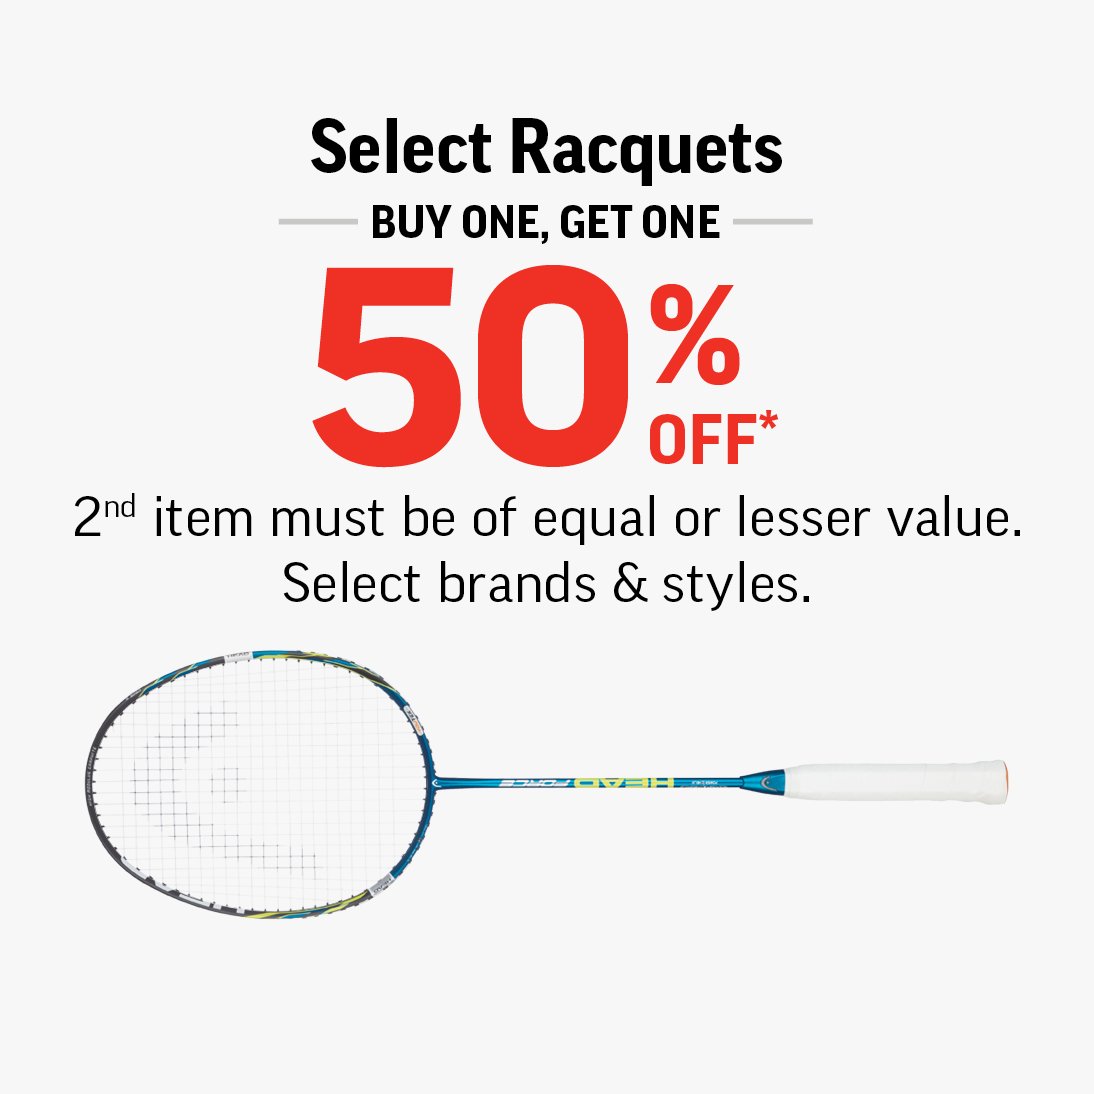 RACQUETS BUY ONE, GET ONE 50% OFF